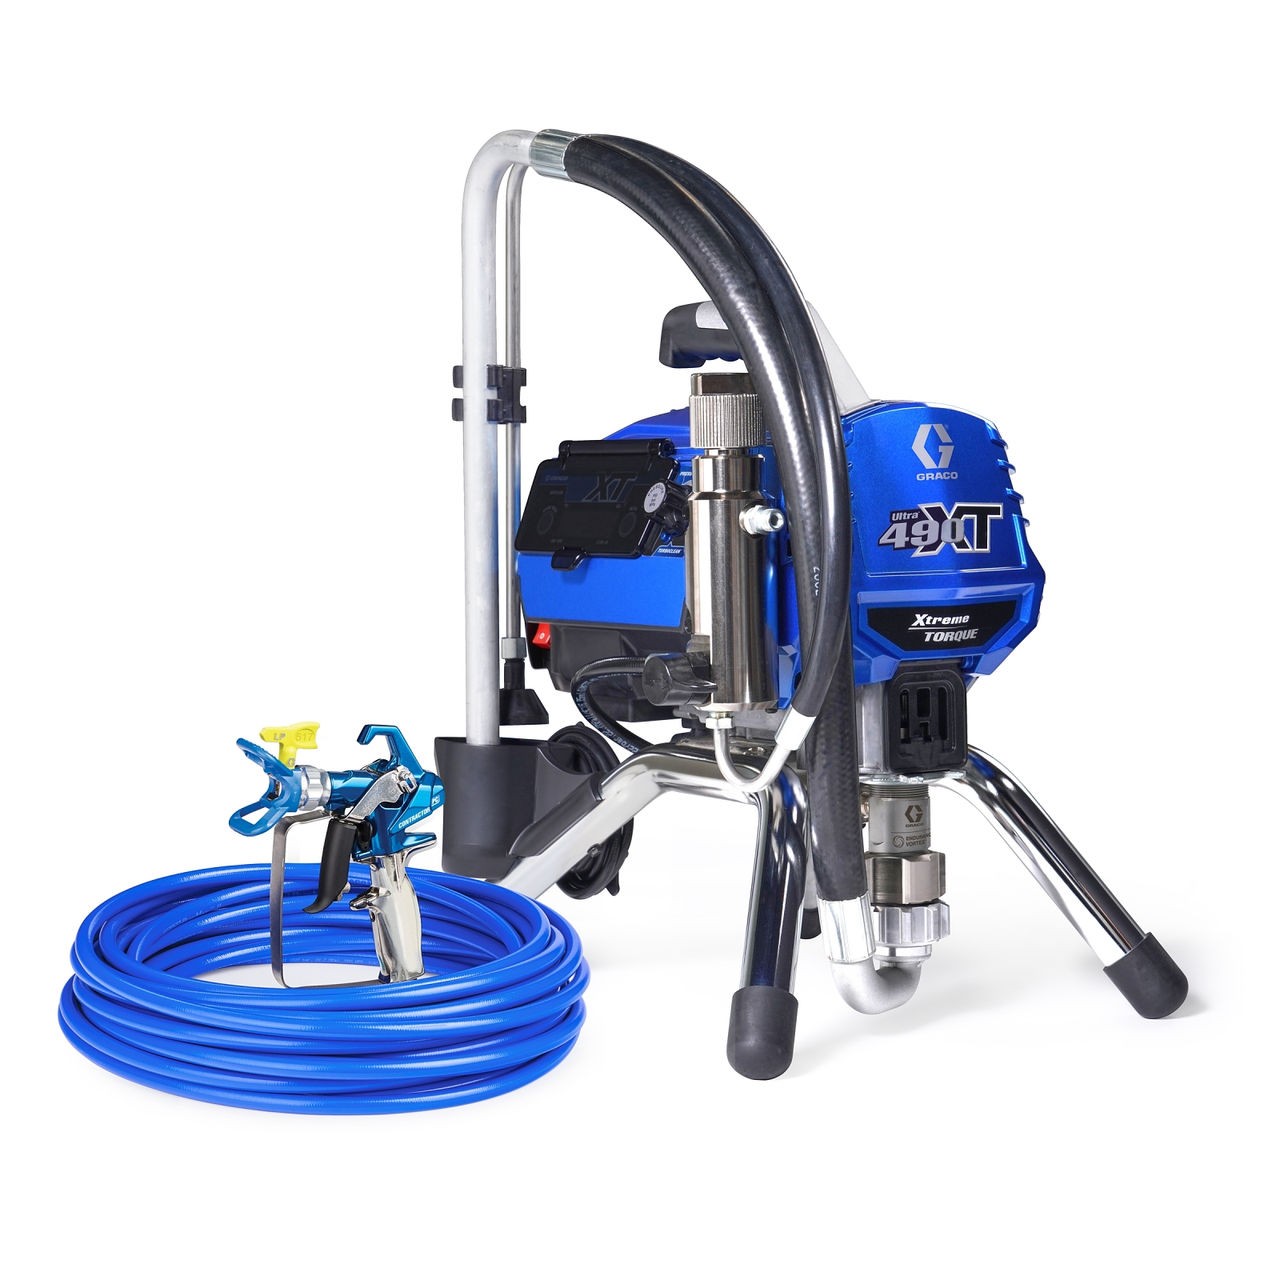 Graco 490Xt Stand Electric Airless Sprayer